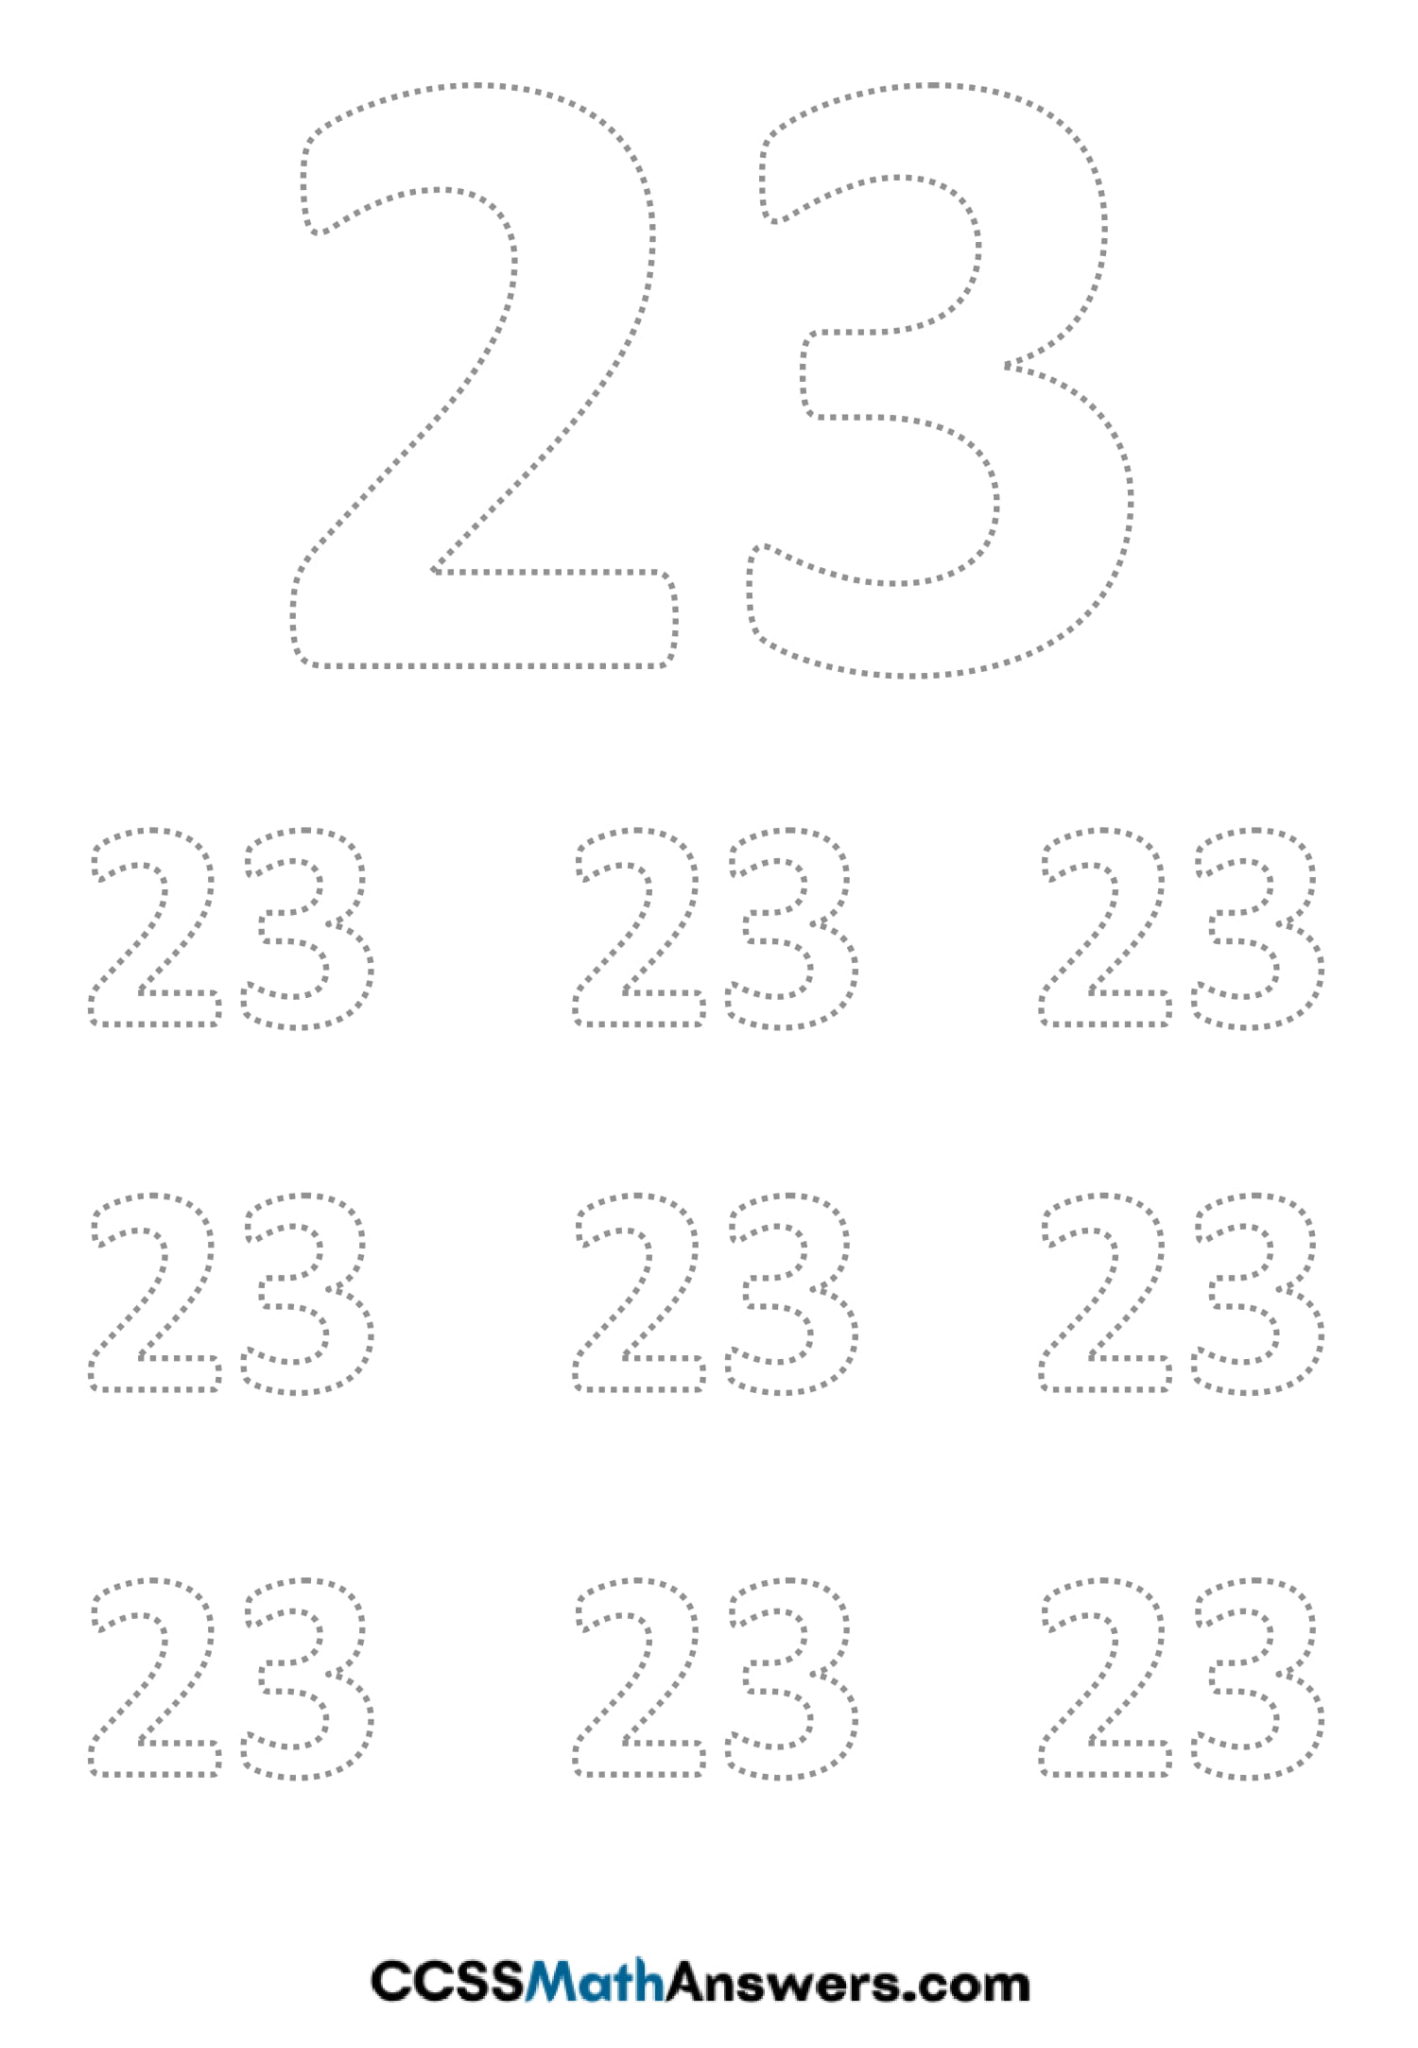 worksheet-on-number-23-preschool-number-23-tracing-counting-writing-activity-worksheets